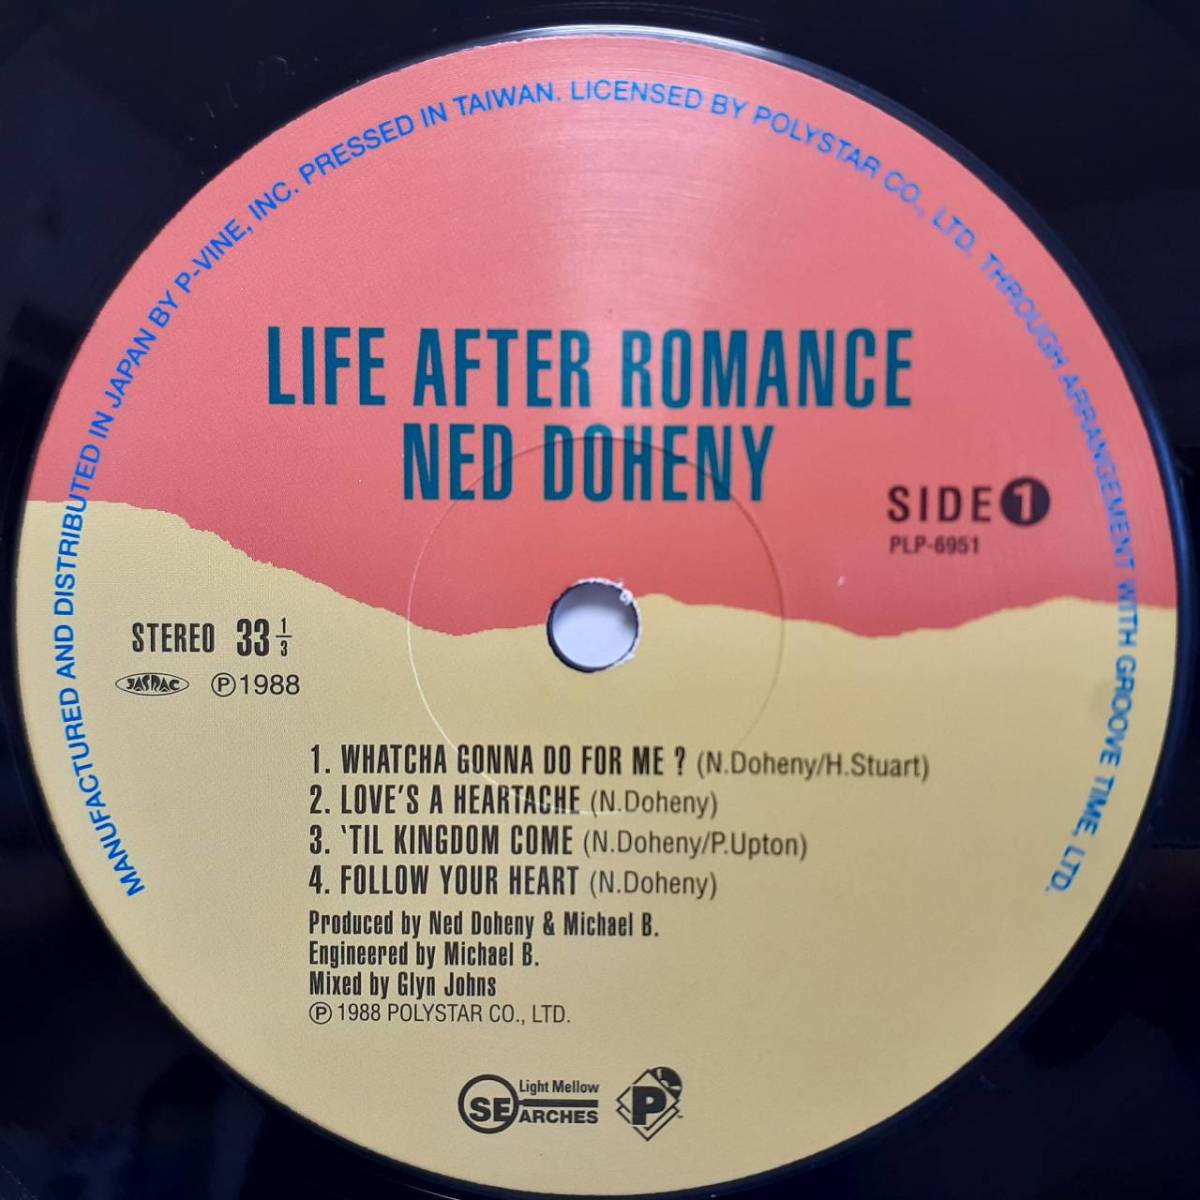  rare limitation record Japanese record LP obi attaching Ned Doheny / Life After Romance 2019 year P-VINE RLP-6951nedo*dohi knee life * after * romance AOR